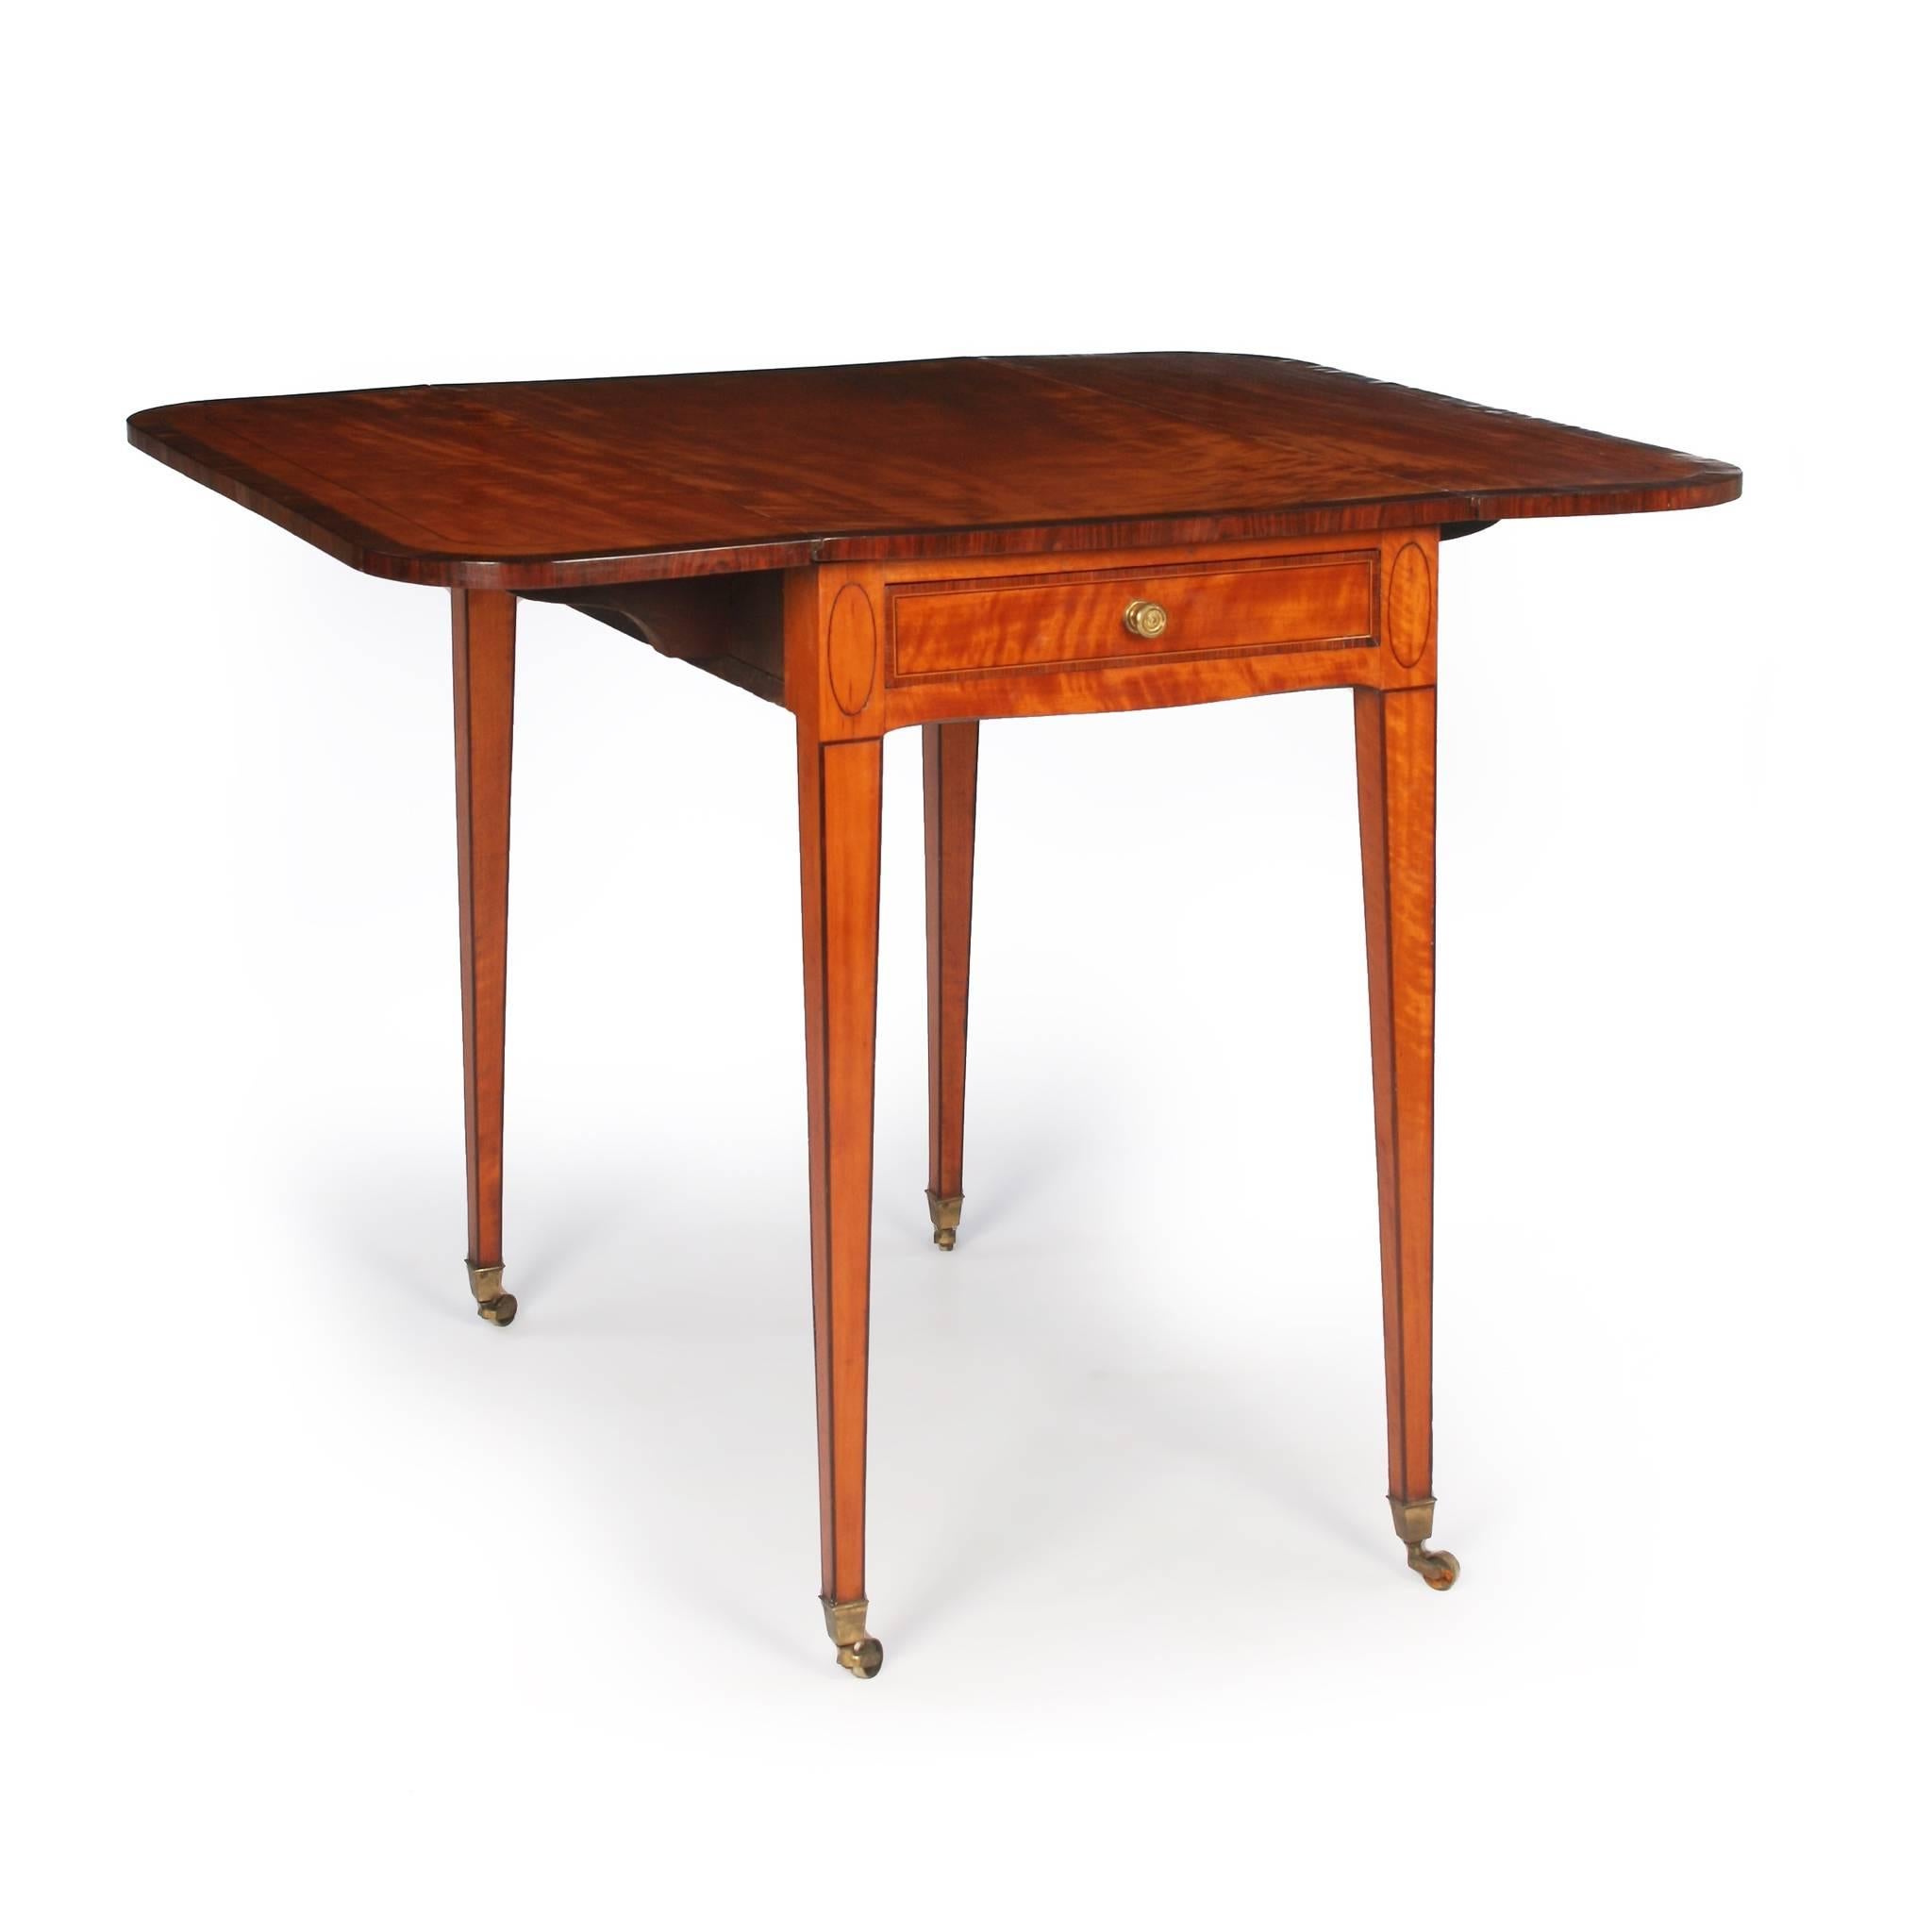 A fine quality Pembroke table contructed from nicely figured West Indian satinwood. The top cross banded in kingwood and with purplewood stringing, above a single drawer frieze and dummy opposing false drawer that are also strung in kingwood and